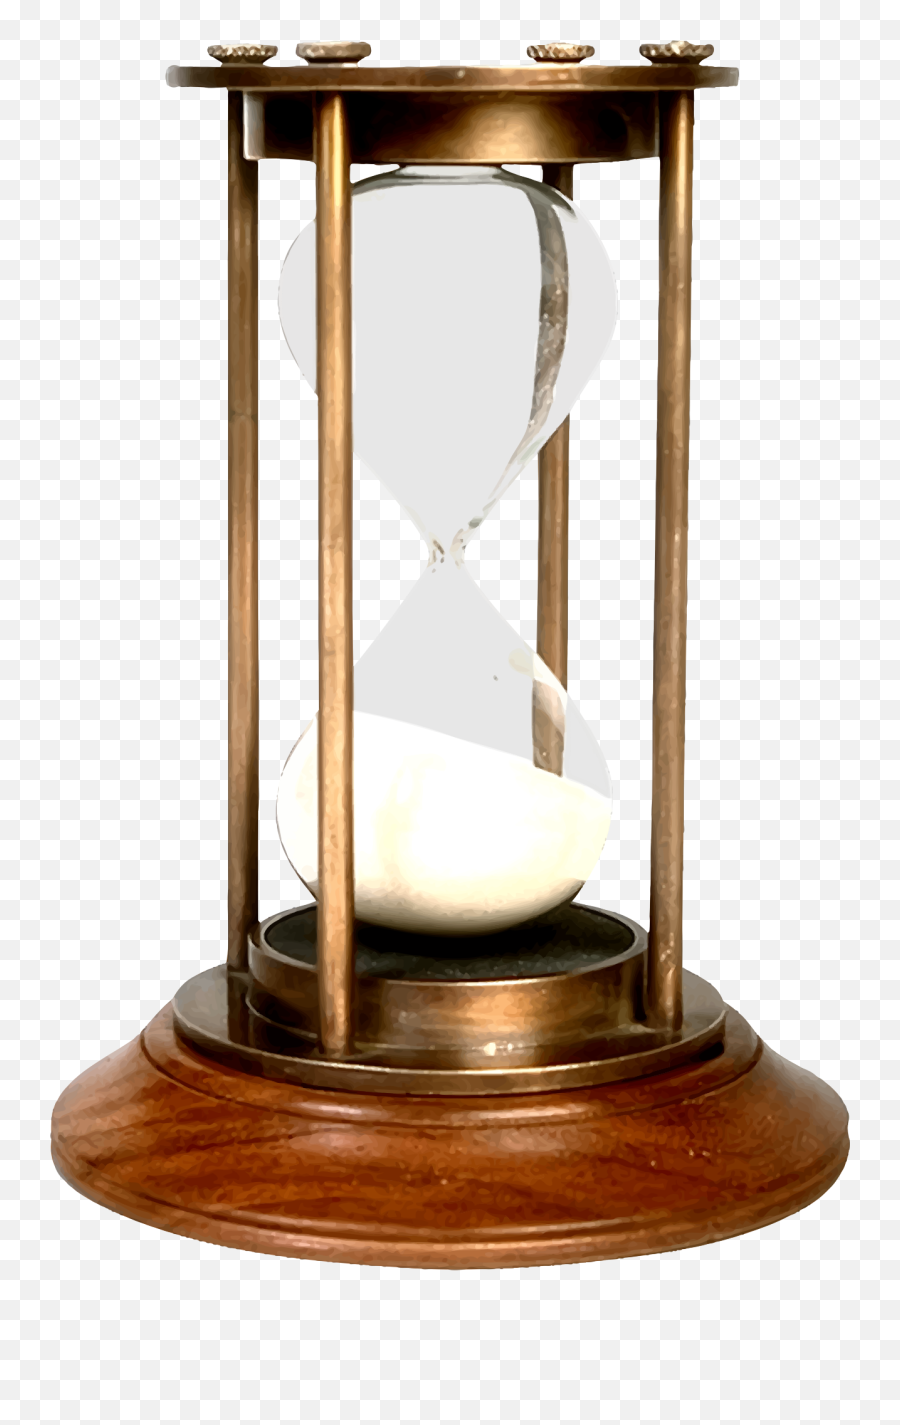 Weighing Scale Hourglass Png Clipart - Instrumentos Náuticos,Hourglass Png